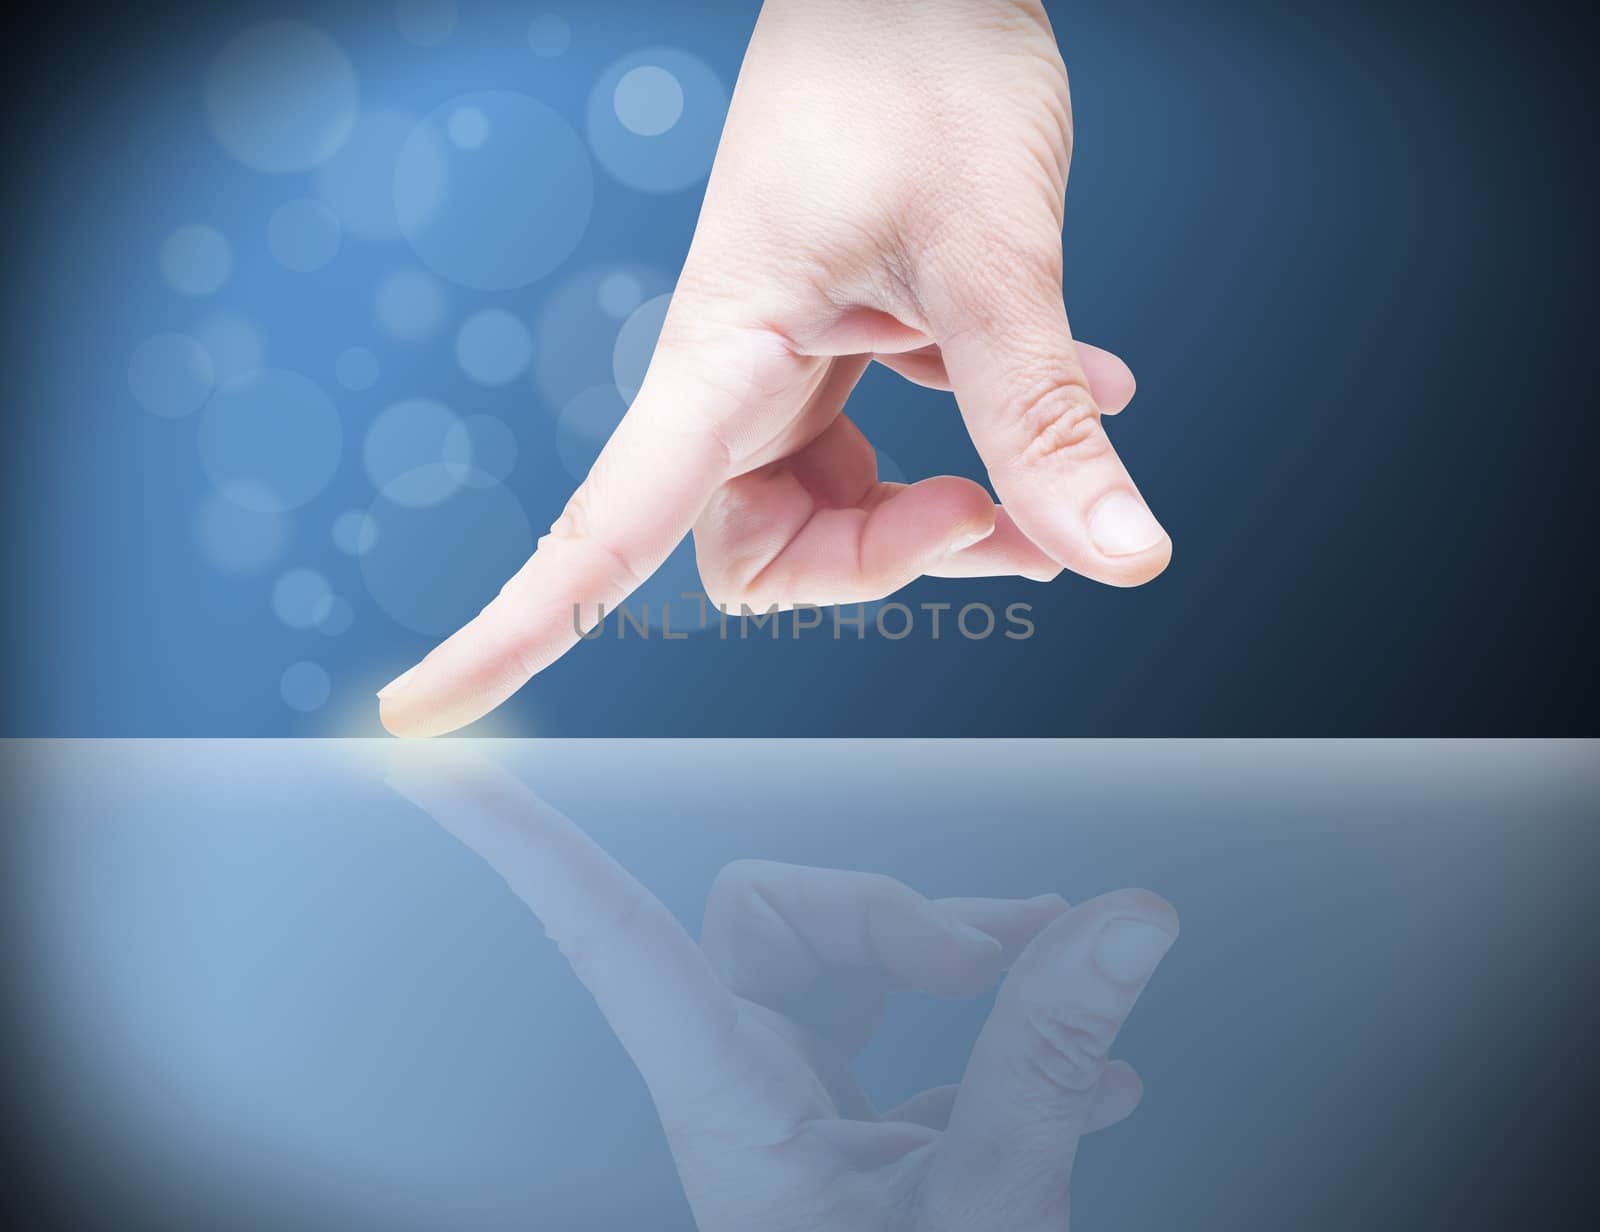 Picture of a finger pointing on a transparent device.